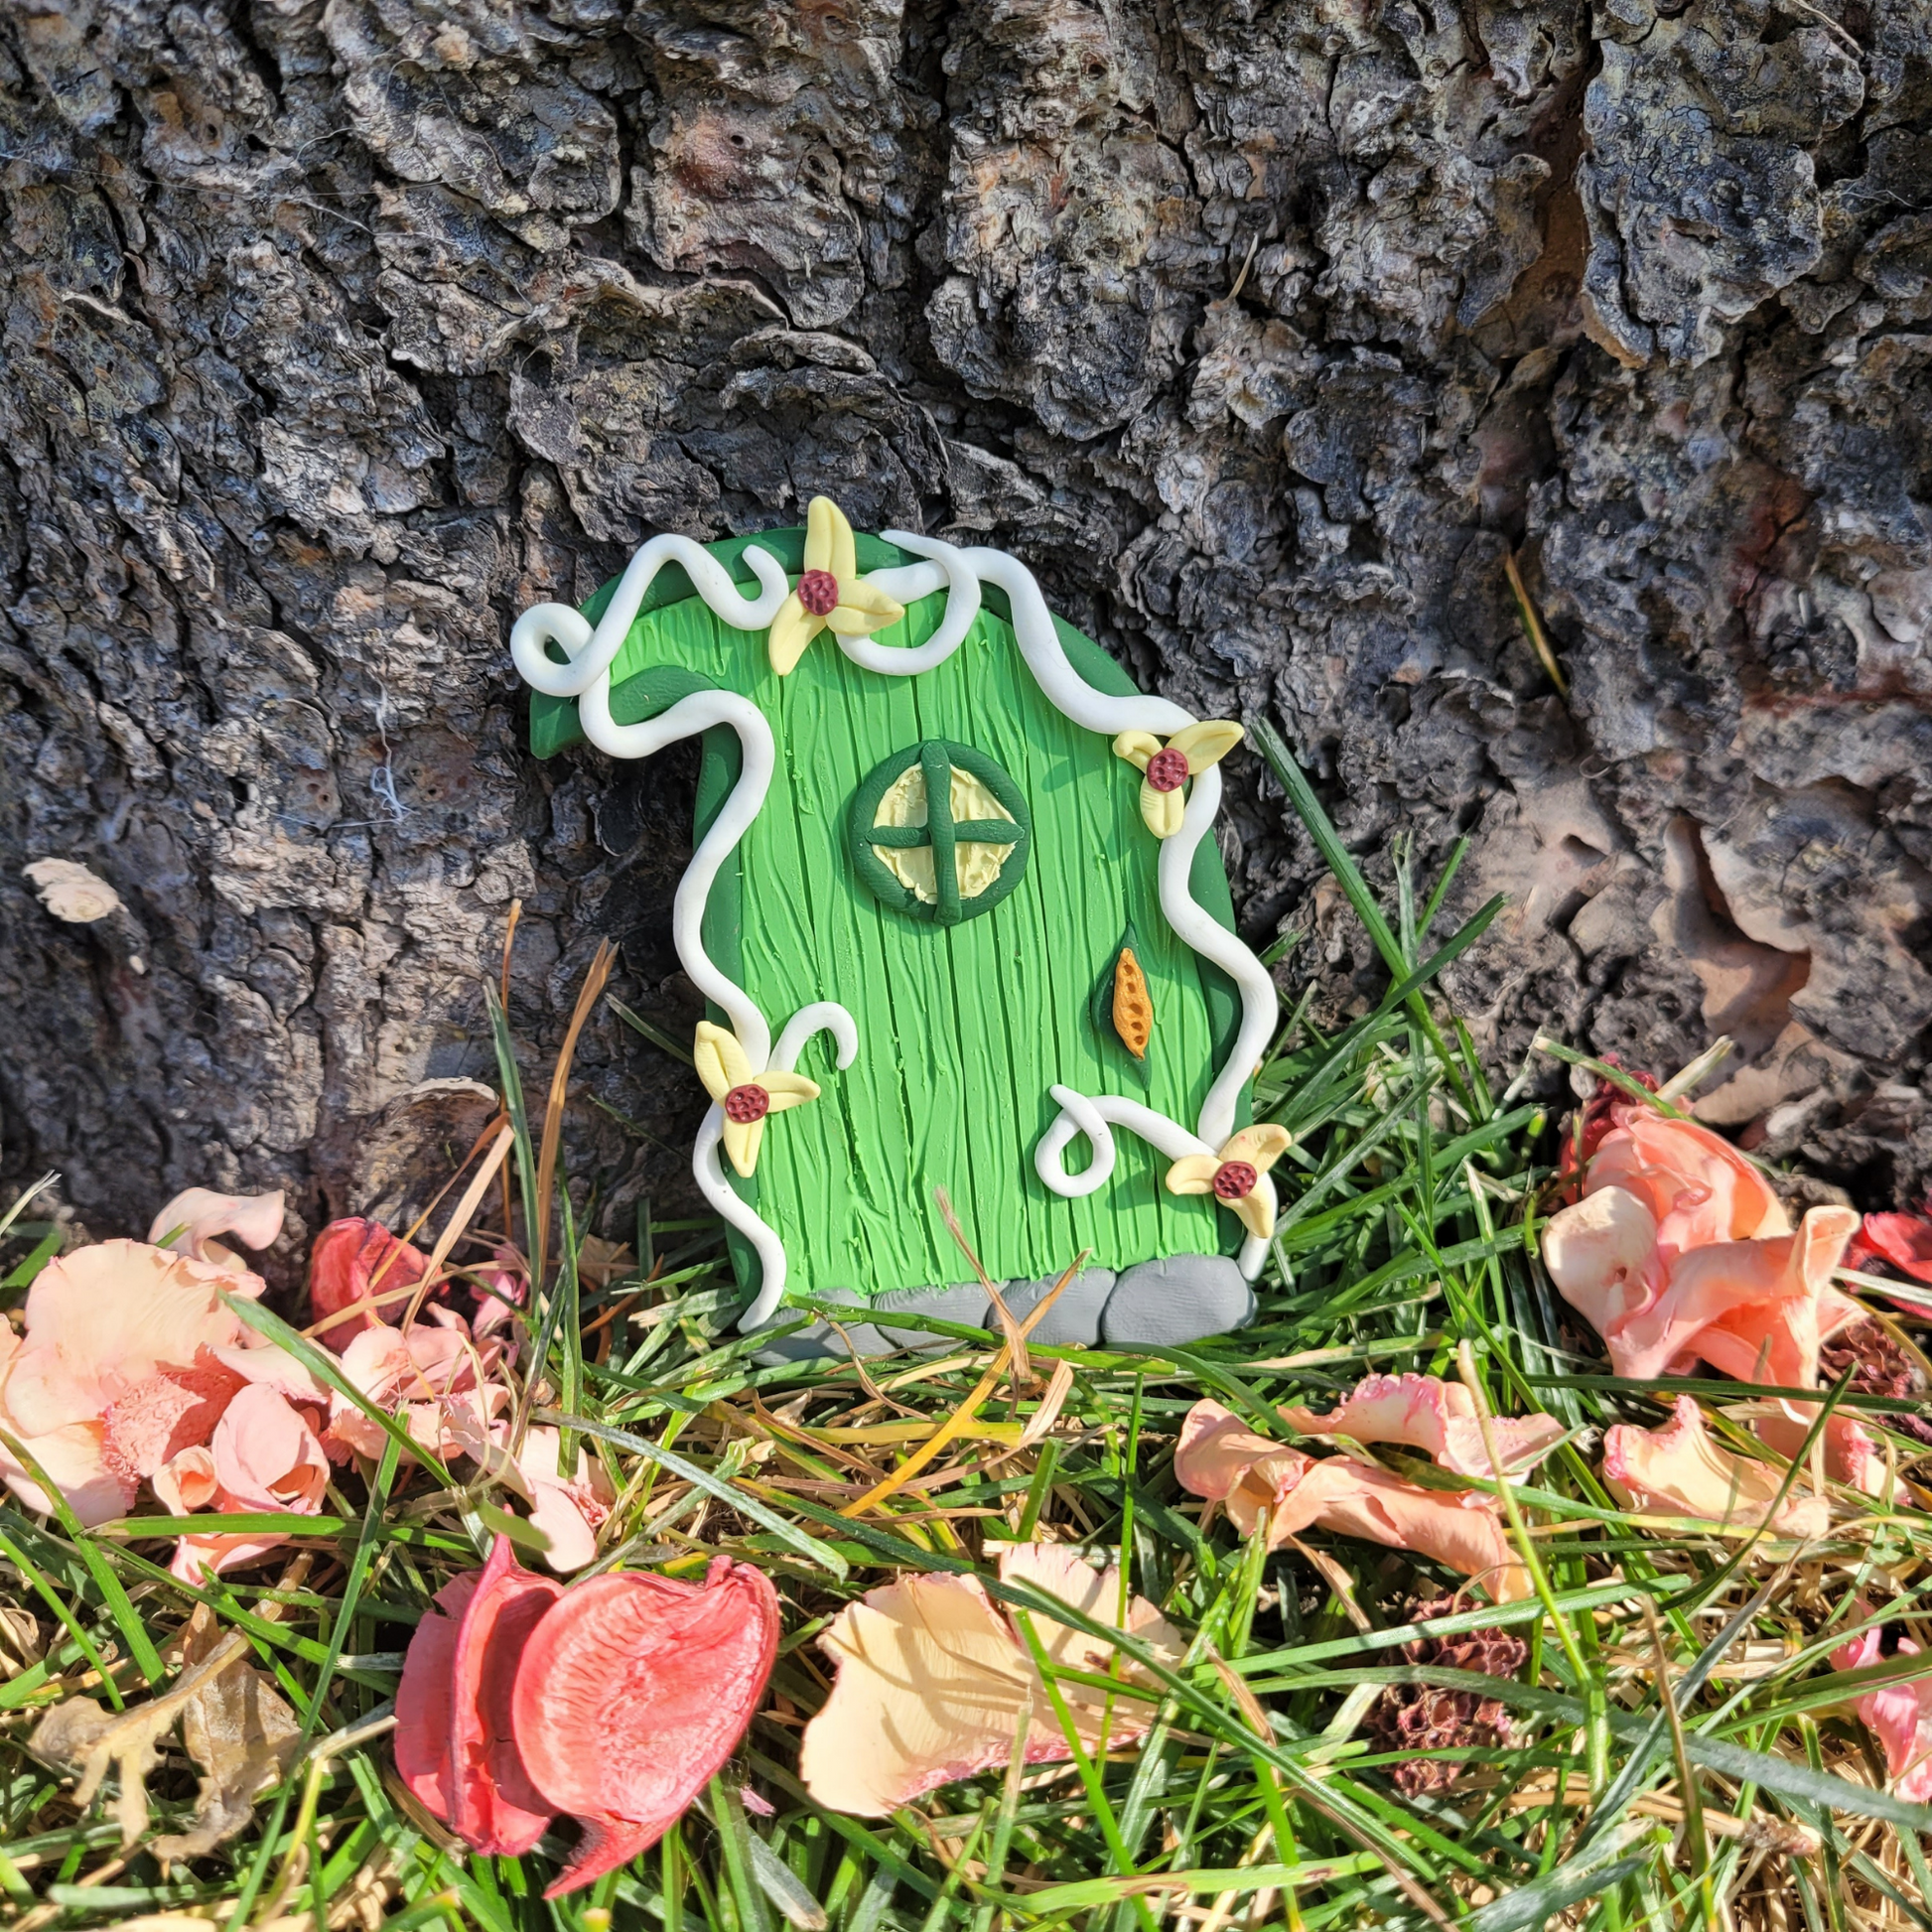 The Elvish fairy door rests against the bark of a tree, surrounded by grass and pink flower petals. Shaped like a leaf, this Elvish door has green wood patterning, white vine finish, and a window. It is detailed with yellow flowers.